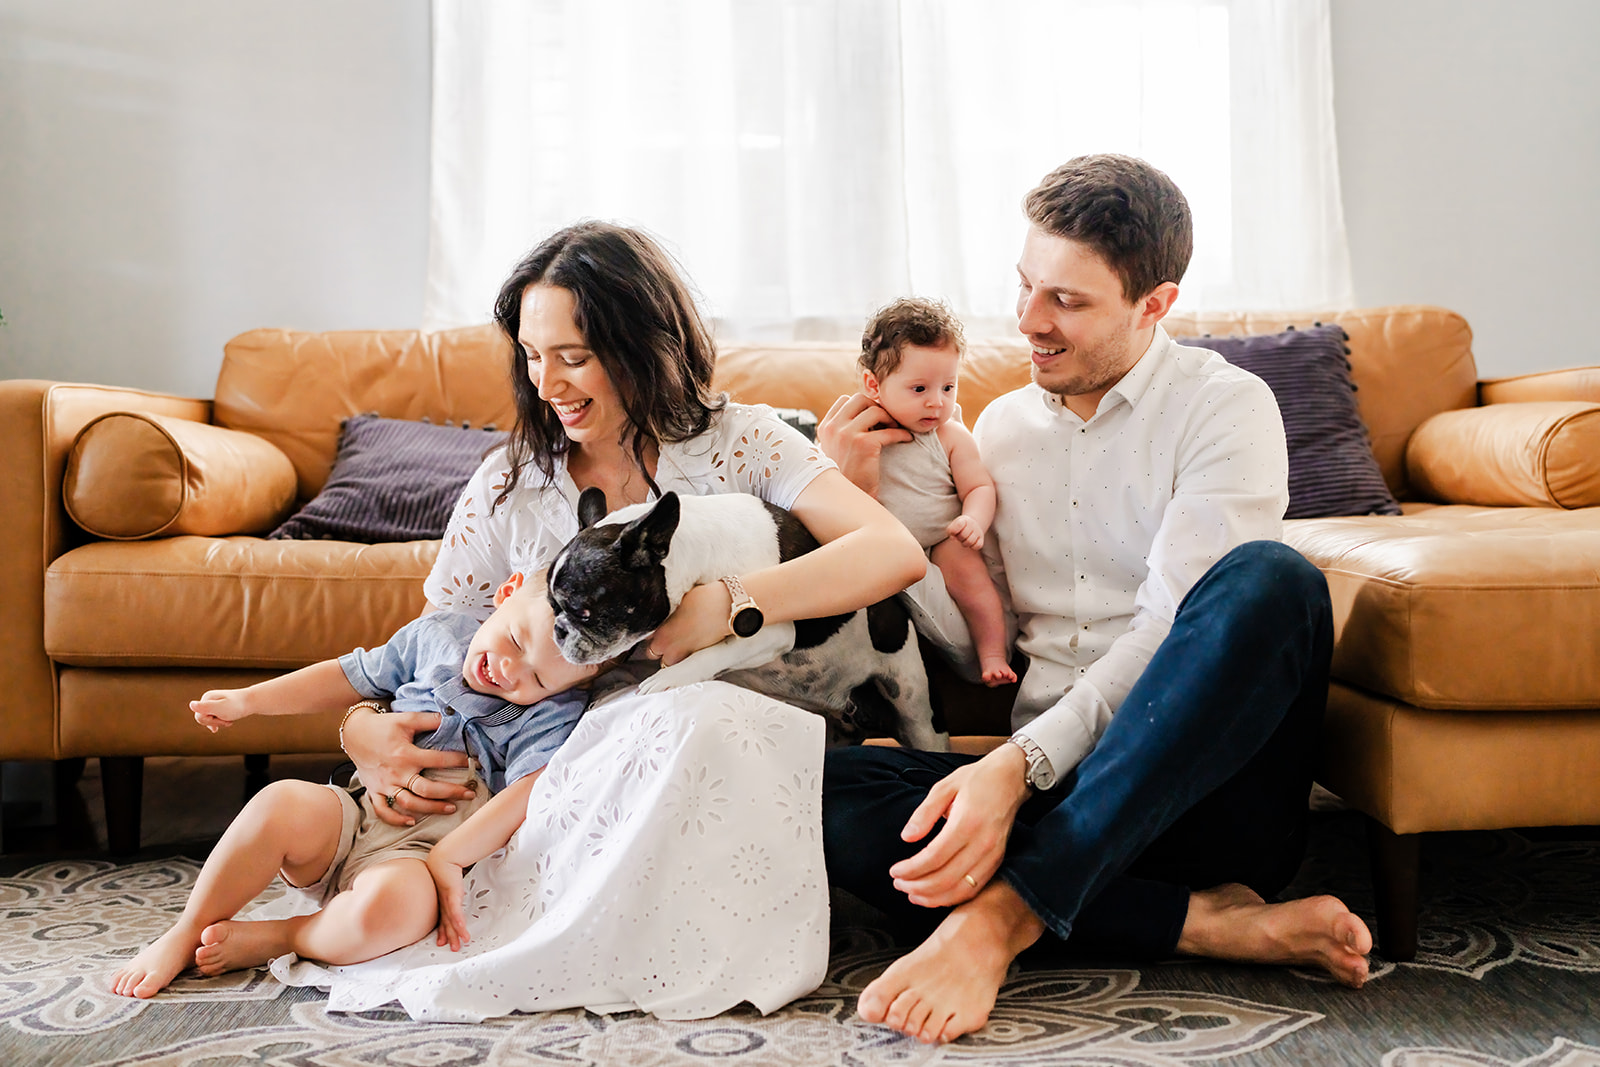 New York City family of four with newborn and dog